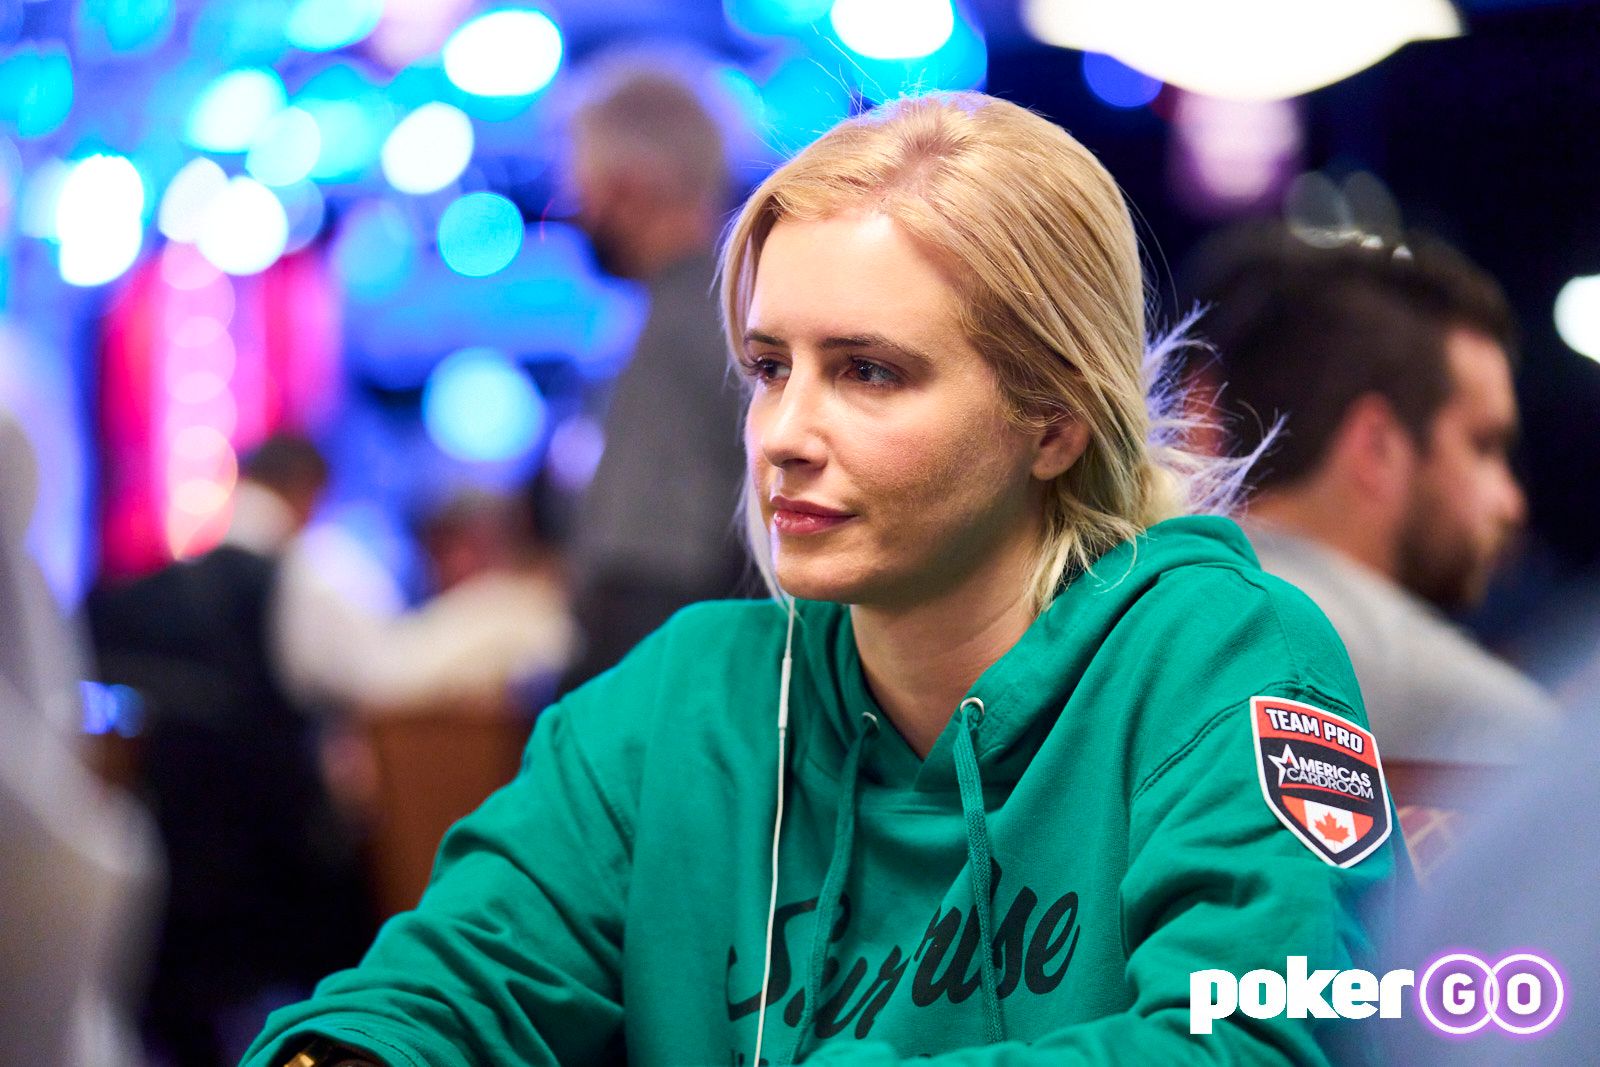 Vanessa Kade Tests Positive for COVID at WSOP, Urges Players to Get Checked